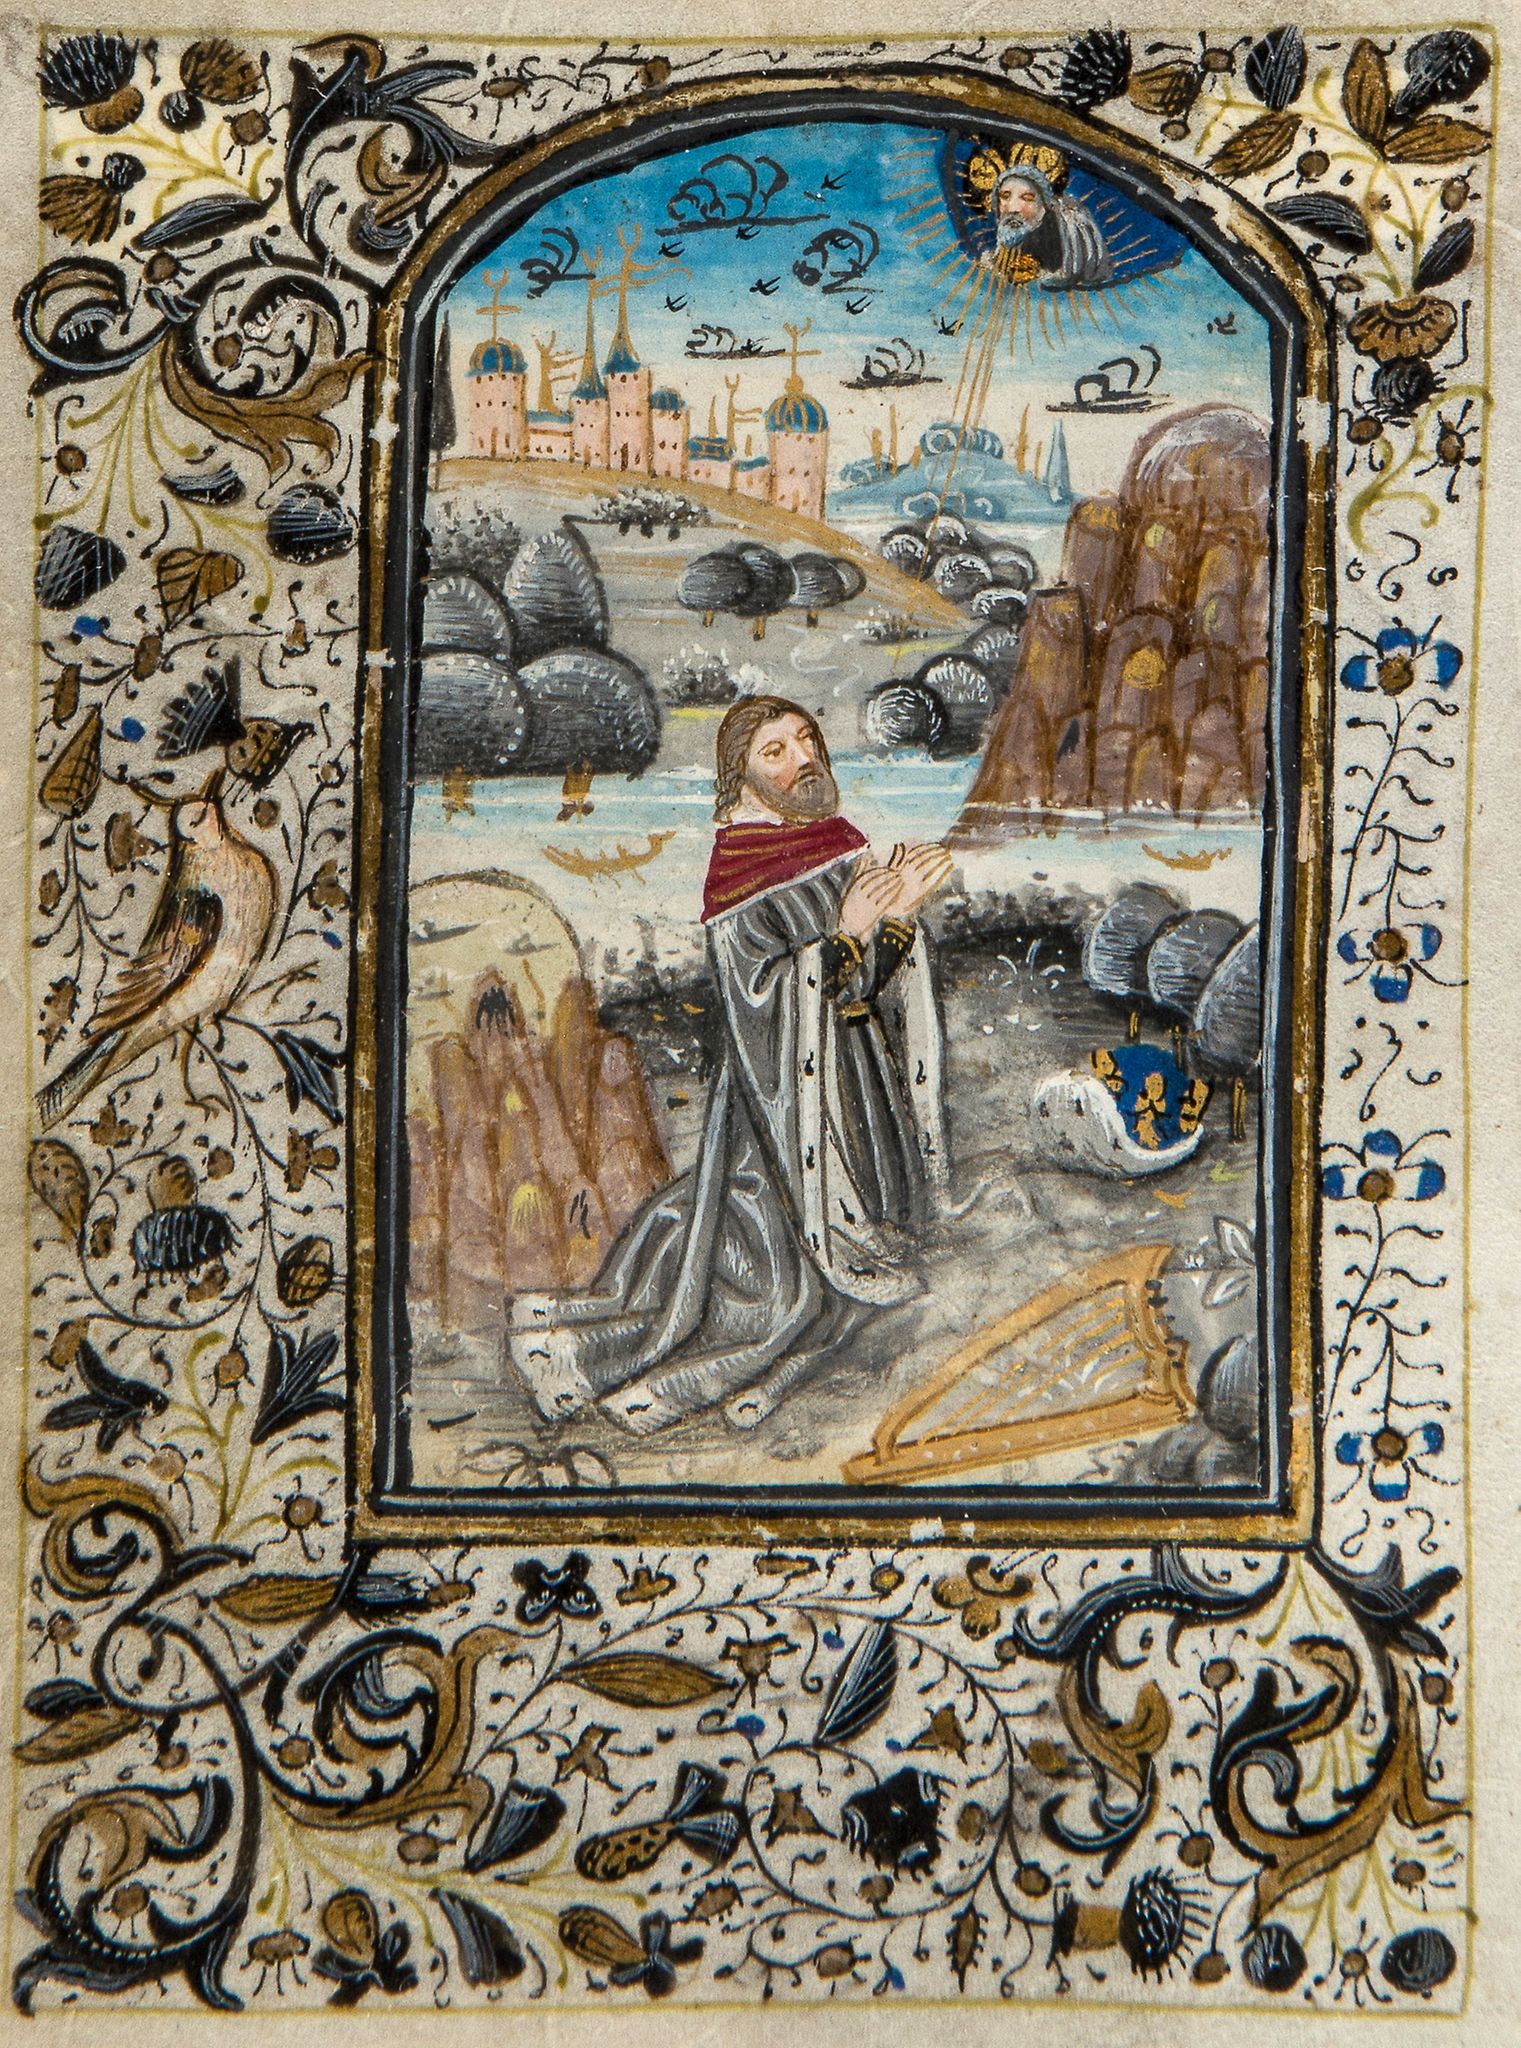 King David, demi-grisaille miniature from an illuminated Book of Hours  King David, demi-grisaille